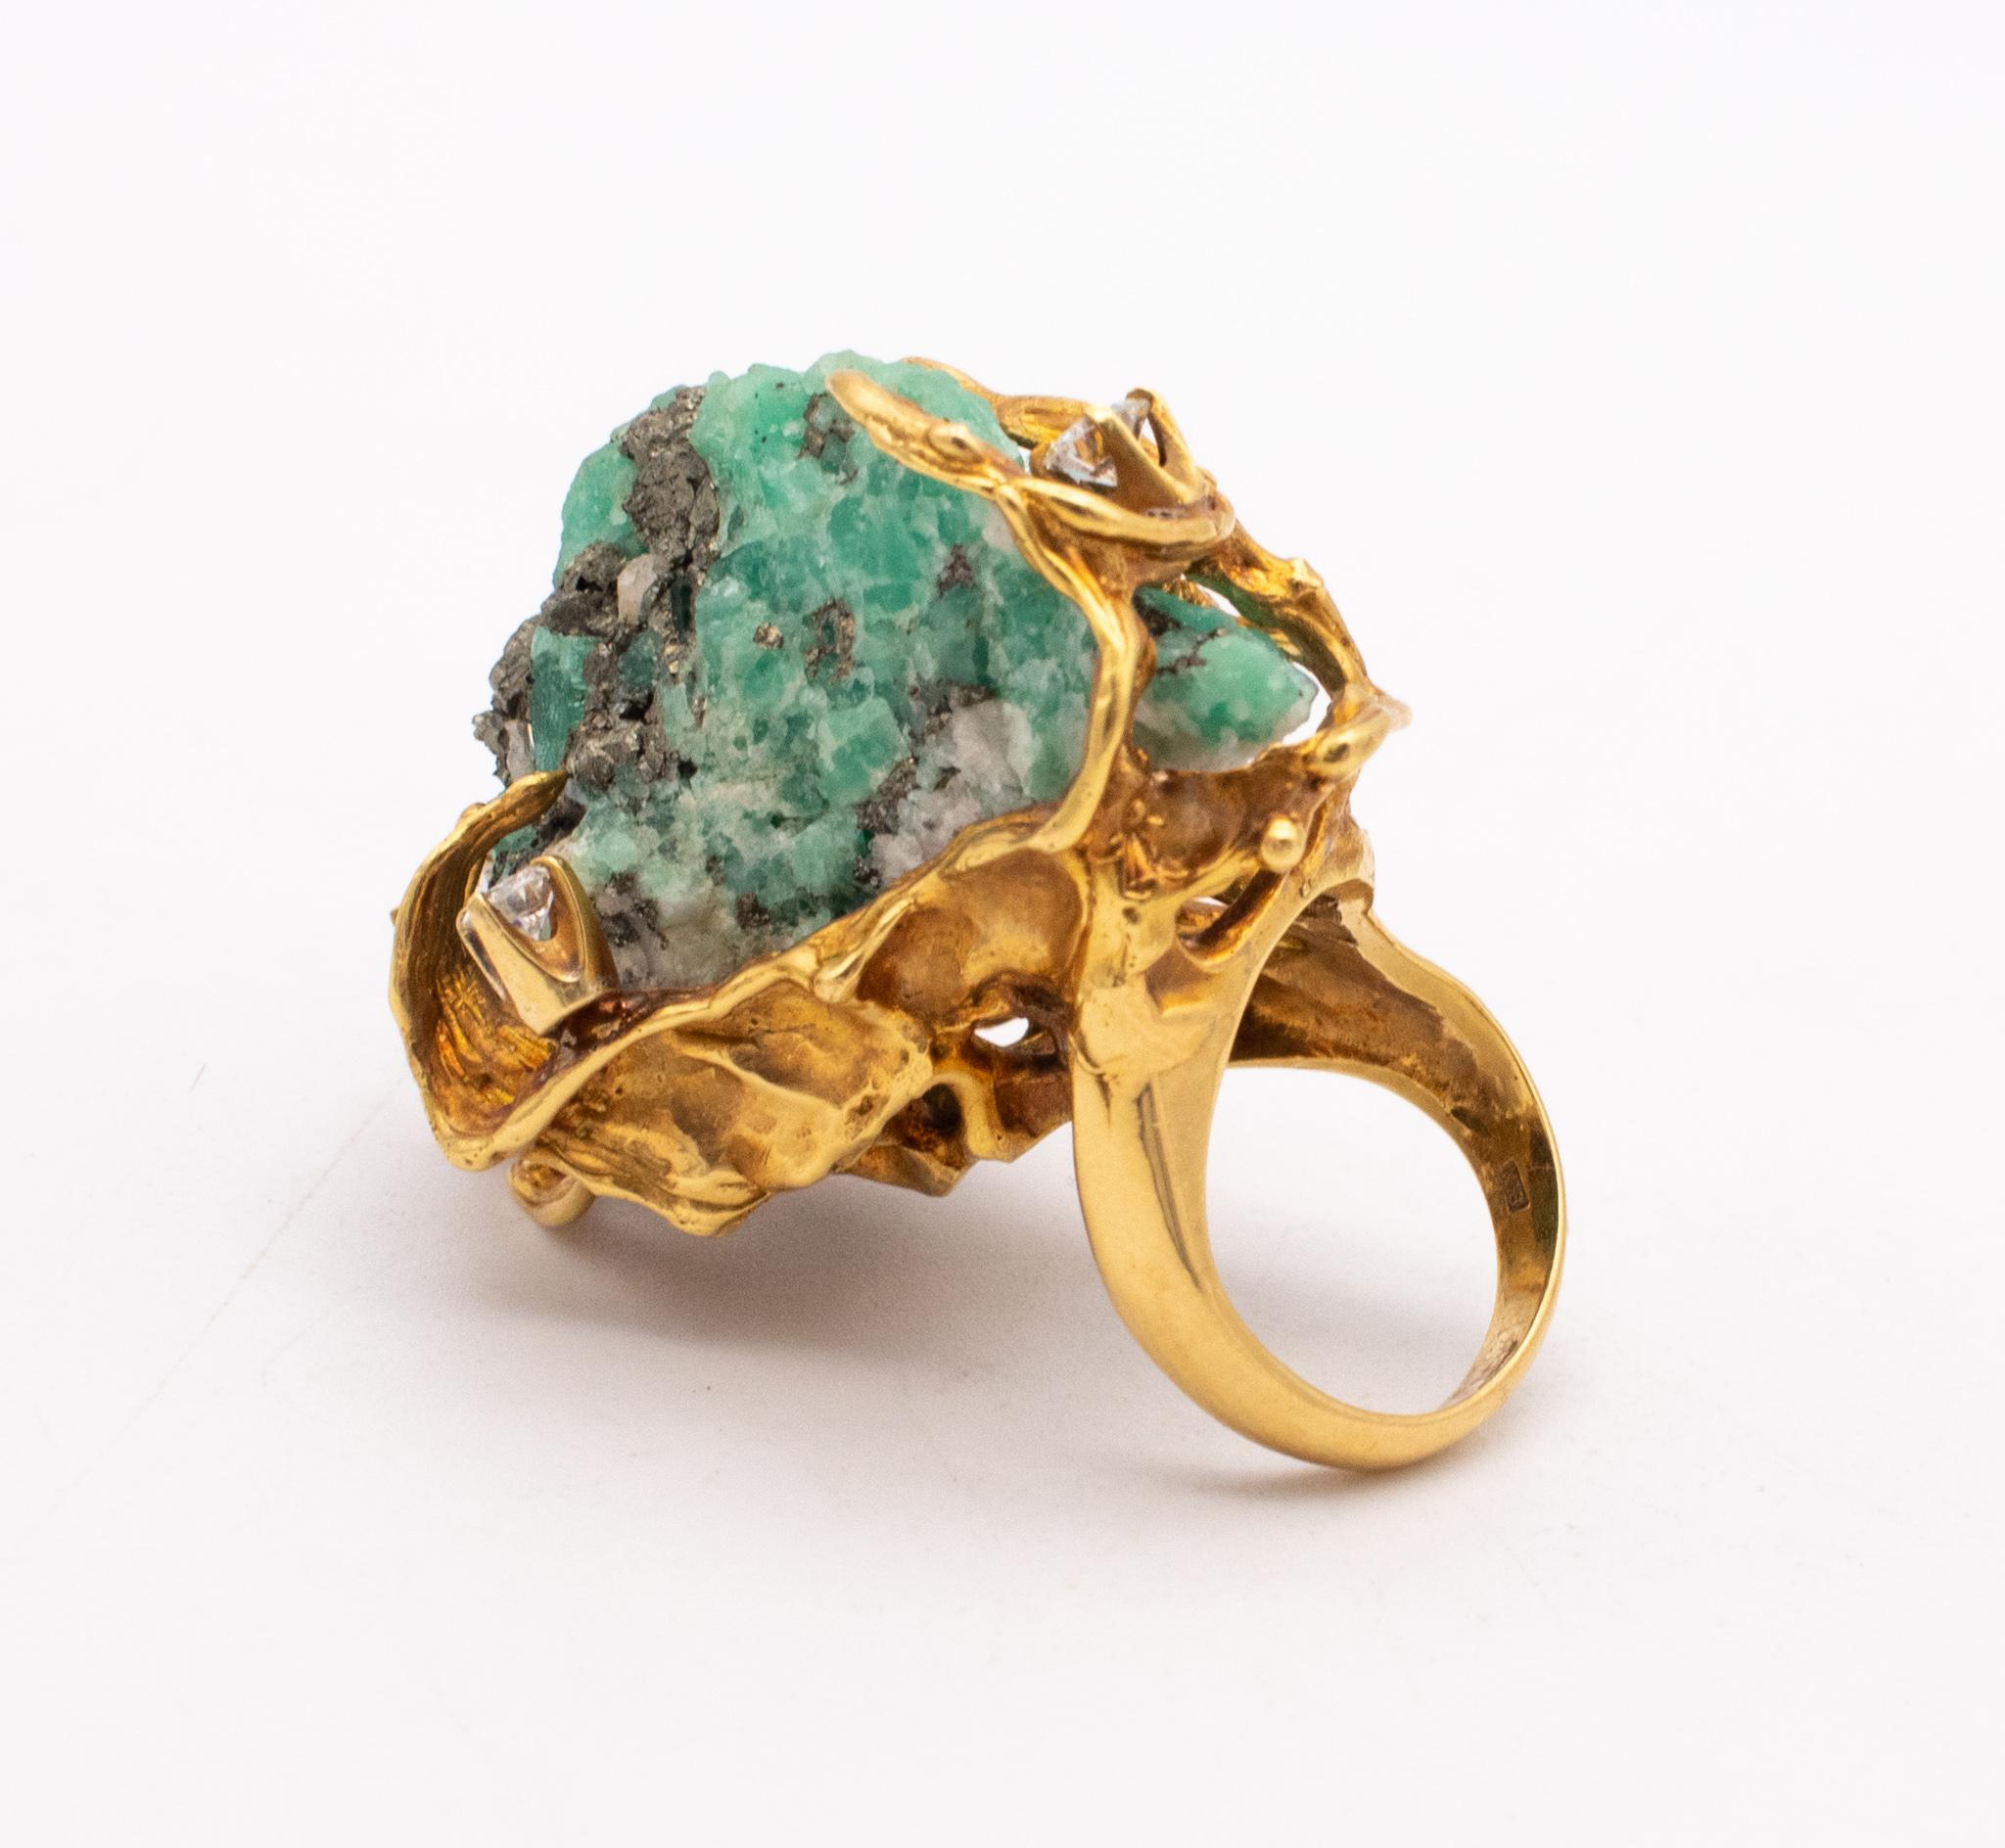 Mixed Cut Modernist 1960 Massive Cocktail Ring in 18k with VS Diamonds and Rough Emerald For Sale